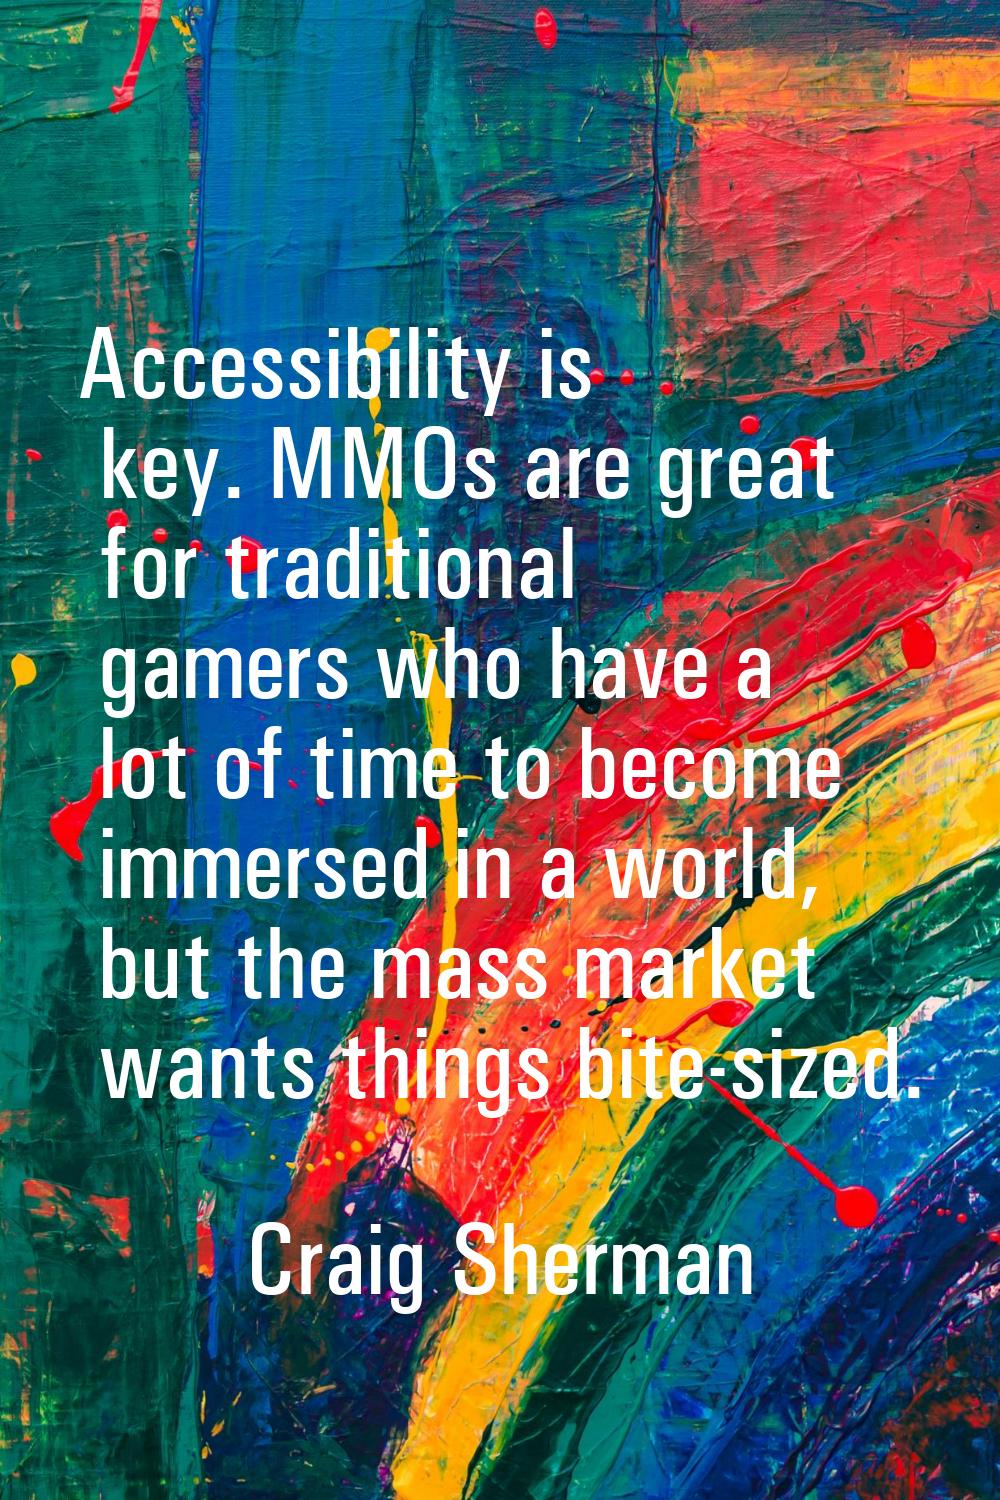 Accessibility is key. MMOs are great for traditional gamers who have a lot of time to become immers